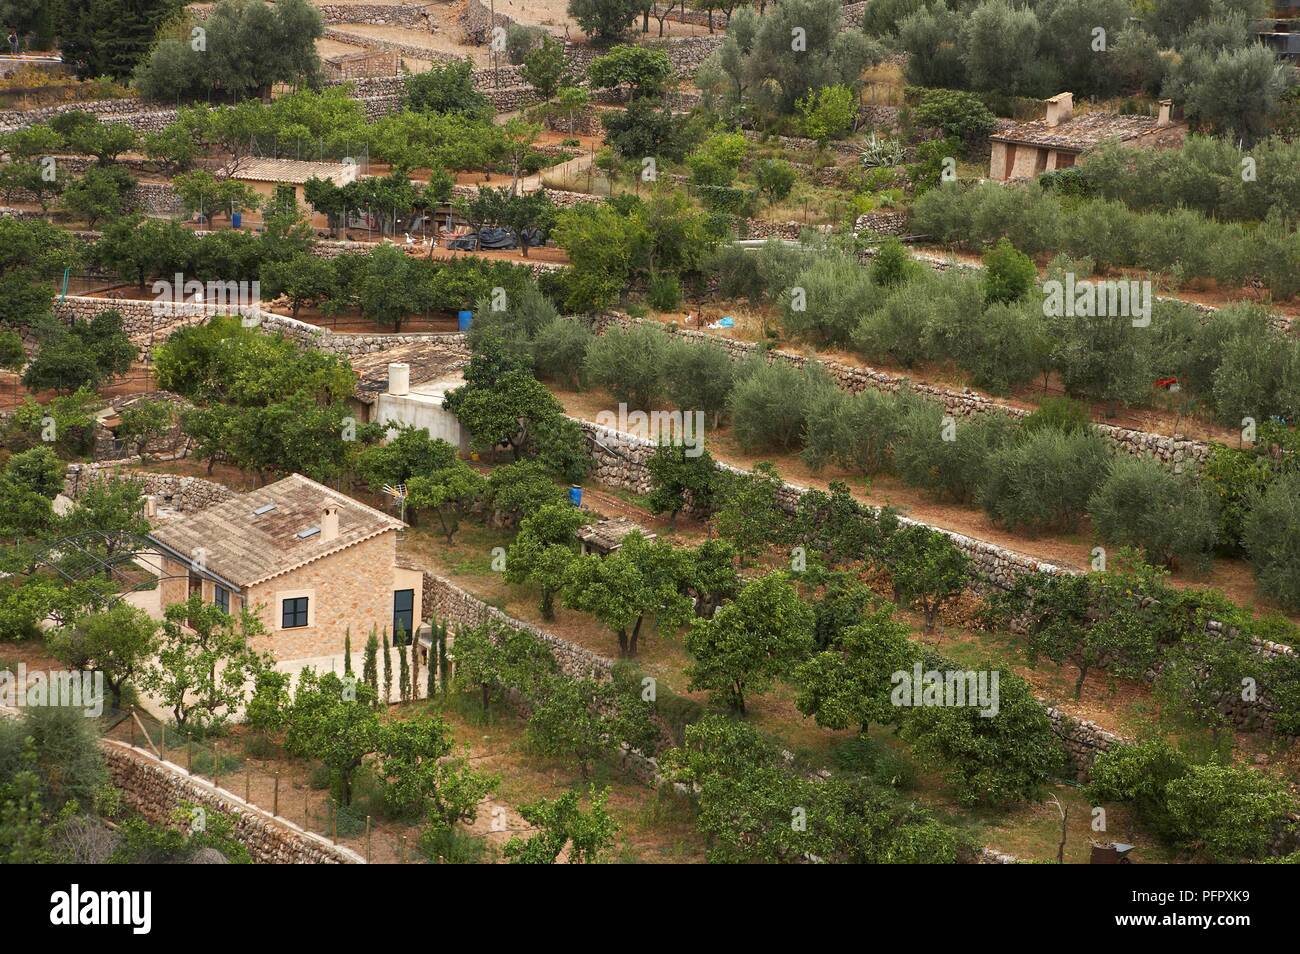 Spain, Mallorca, Fornalutx, terraced olive grove Stock Photo